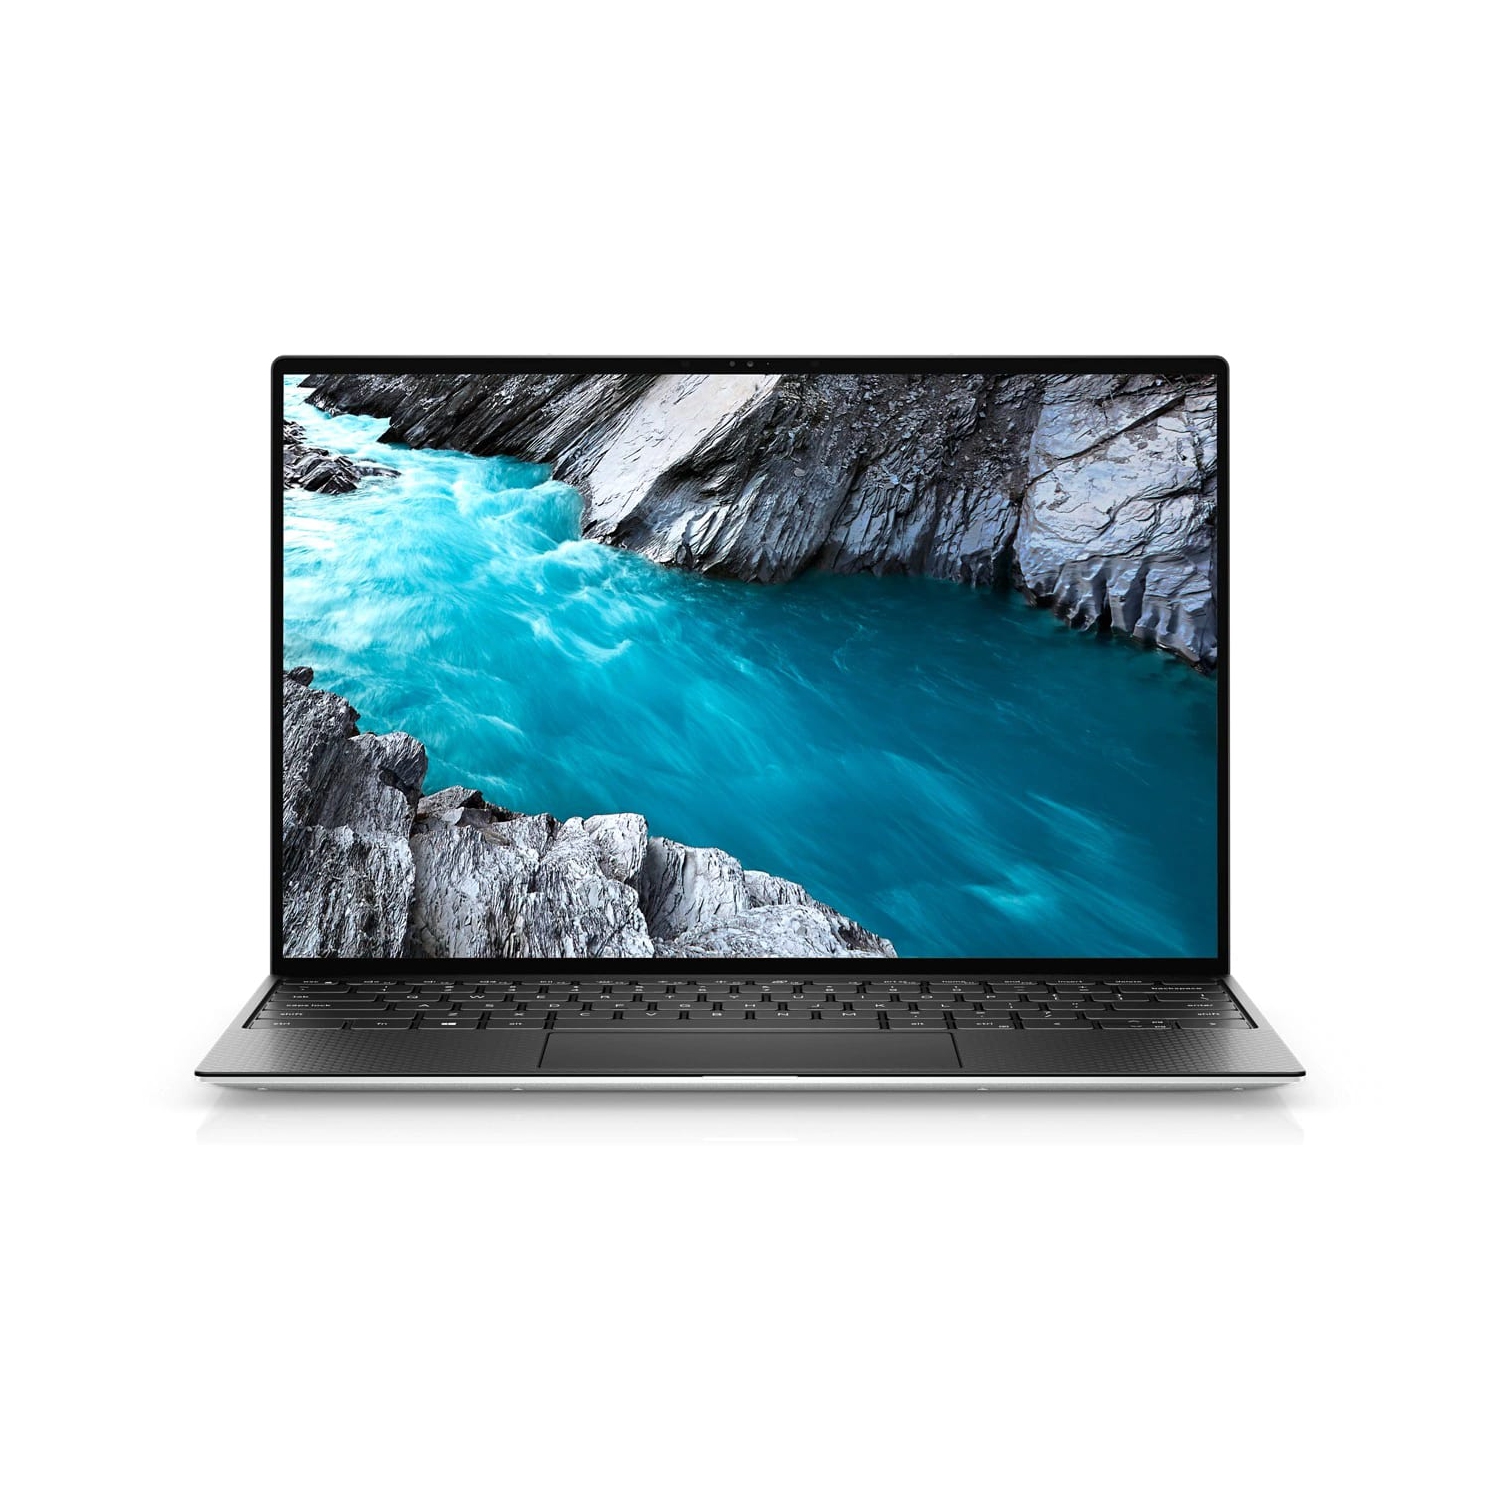 Refurbished (Excellent) - Dell XPS 13 9310 Laptop (2020) | 13.4" FHD+ | Core i7 - 512GB SSD - 16GB RAM | 4 Cores @ 4.7 GHz - 11th Gen CPU Certified Refurbished